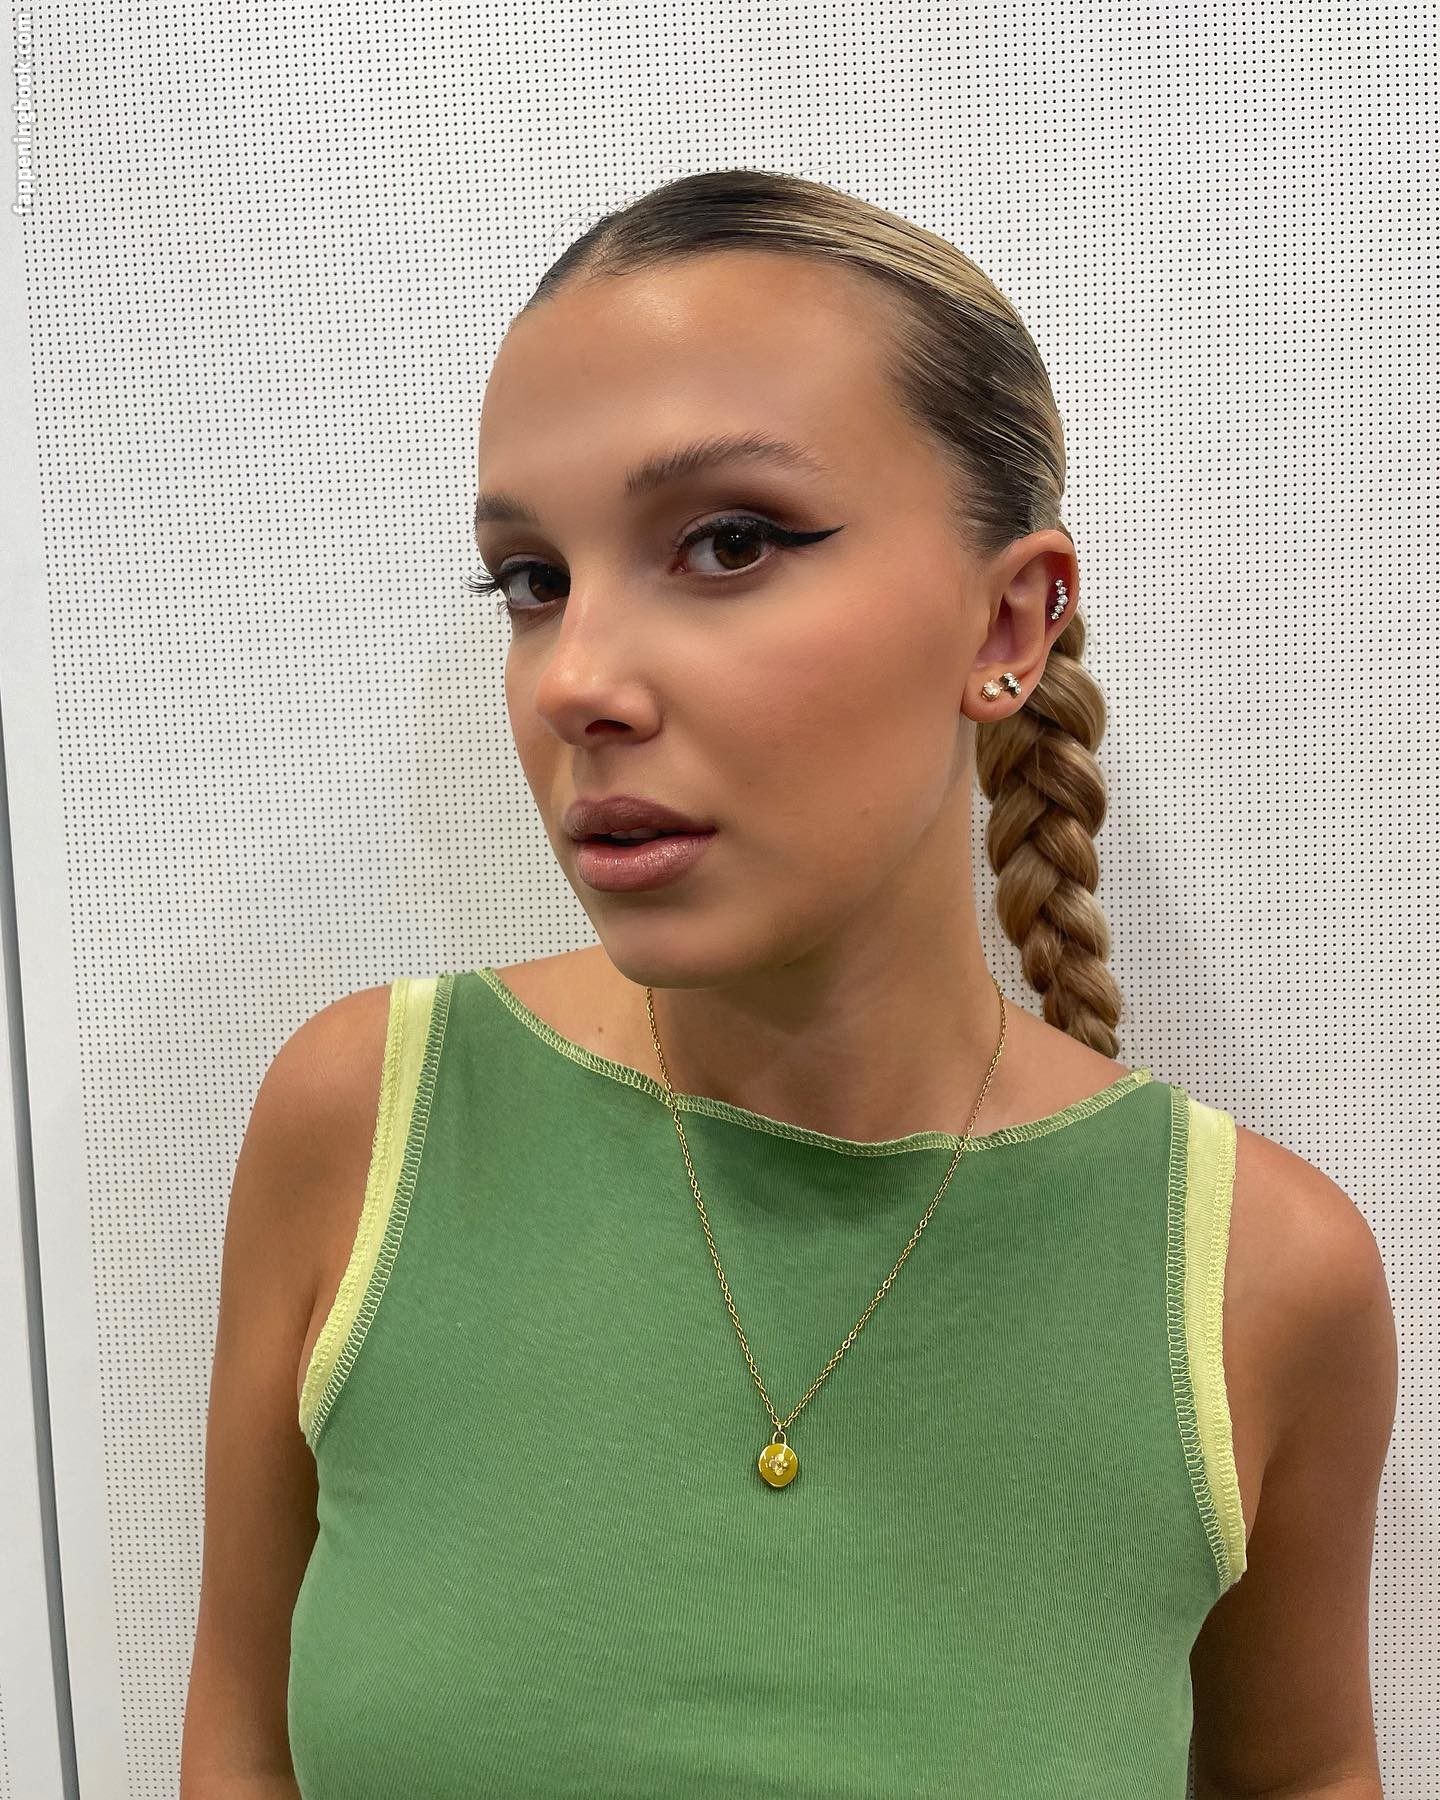 Millie Bobby Brown Nude The Fappening Photo Fappeningbook